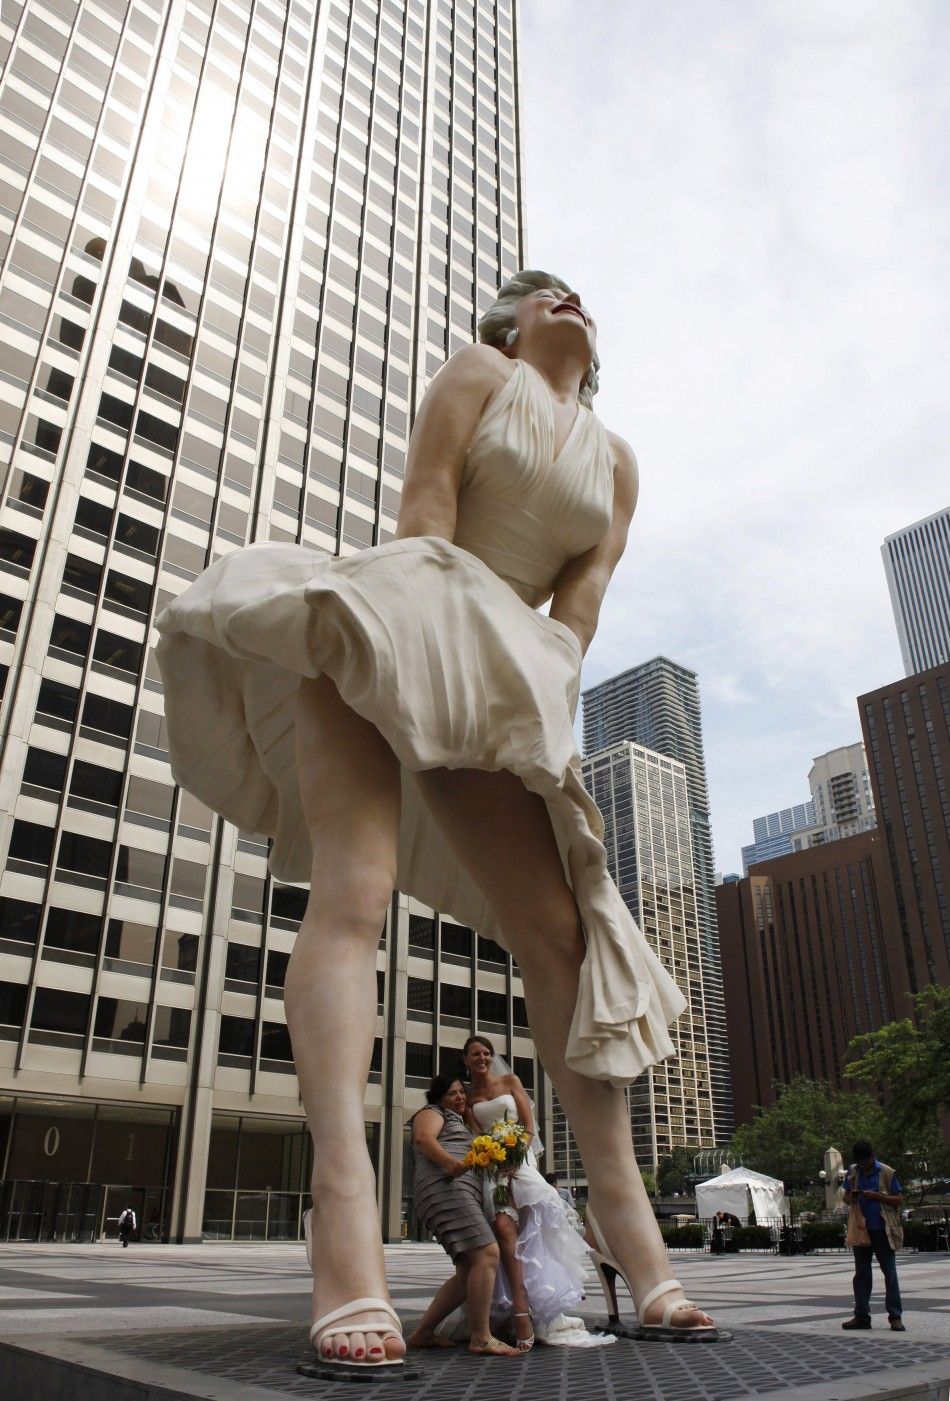 26-foot tall statue of Marilyn Monroe in Chicago